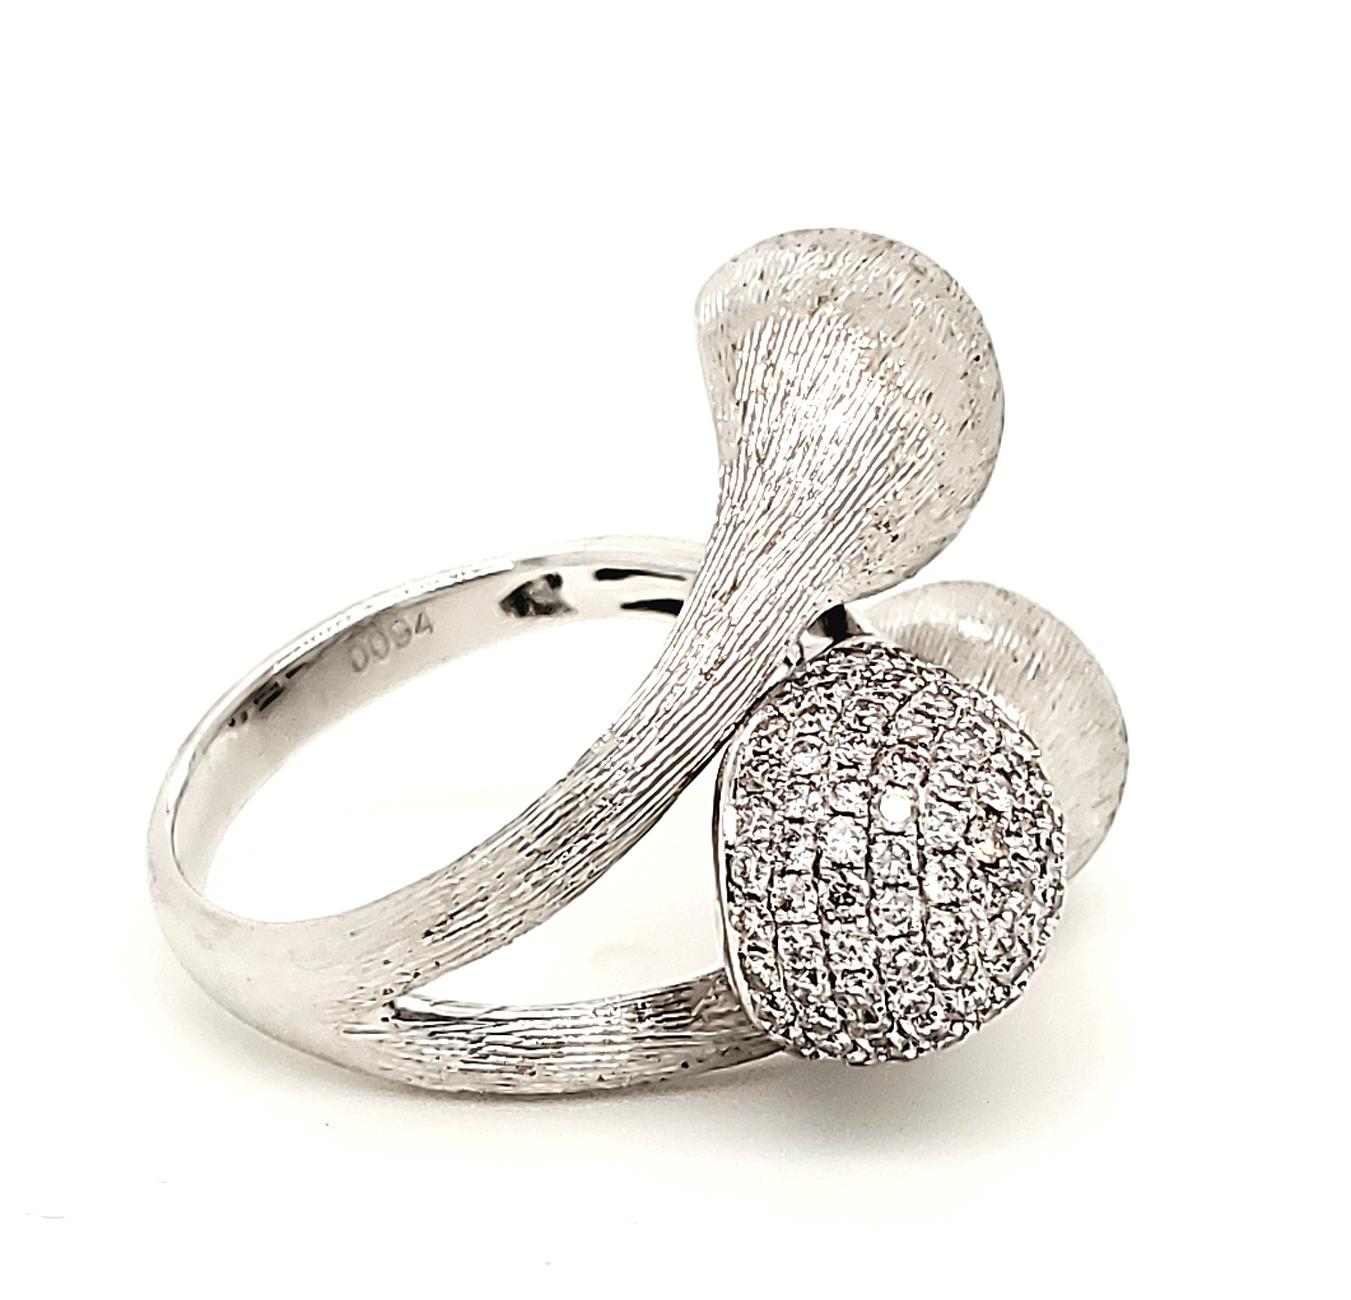 The 0.94 Carat White Diamond and White Gold Modern Fashion Ring features a unique sphere shape design. Two balls are made of 18k white gold while the third ball is covered in white diamonds. This stunning ring puts a modern twist on luxury diamond